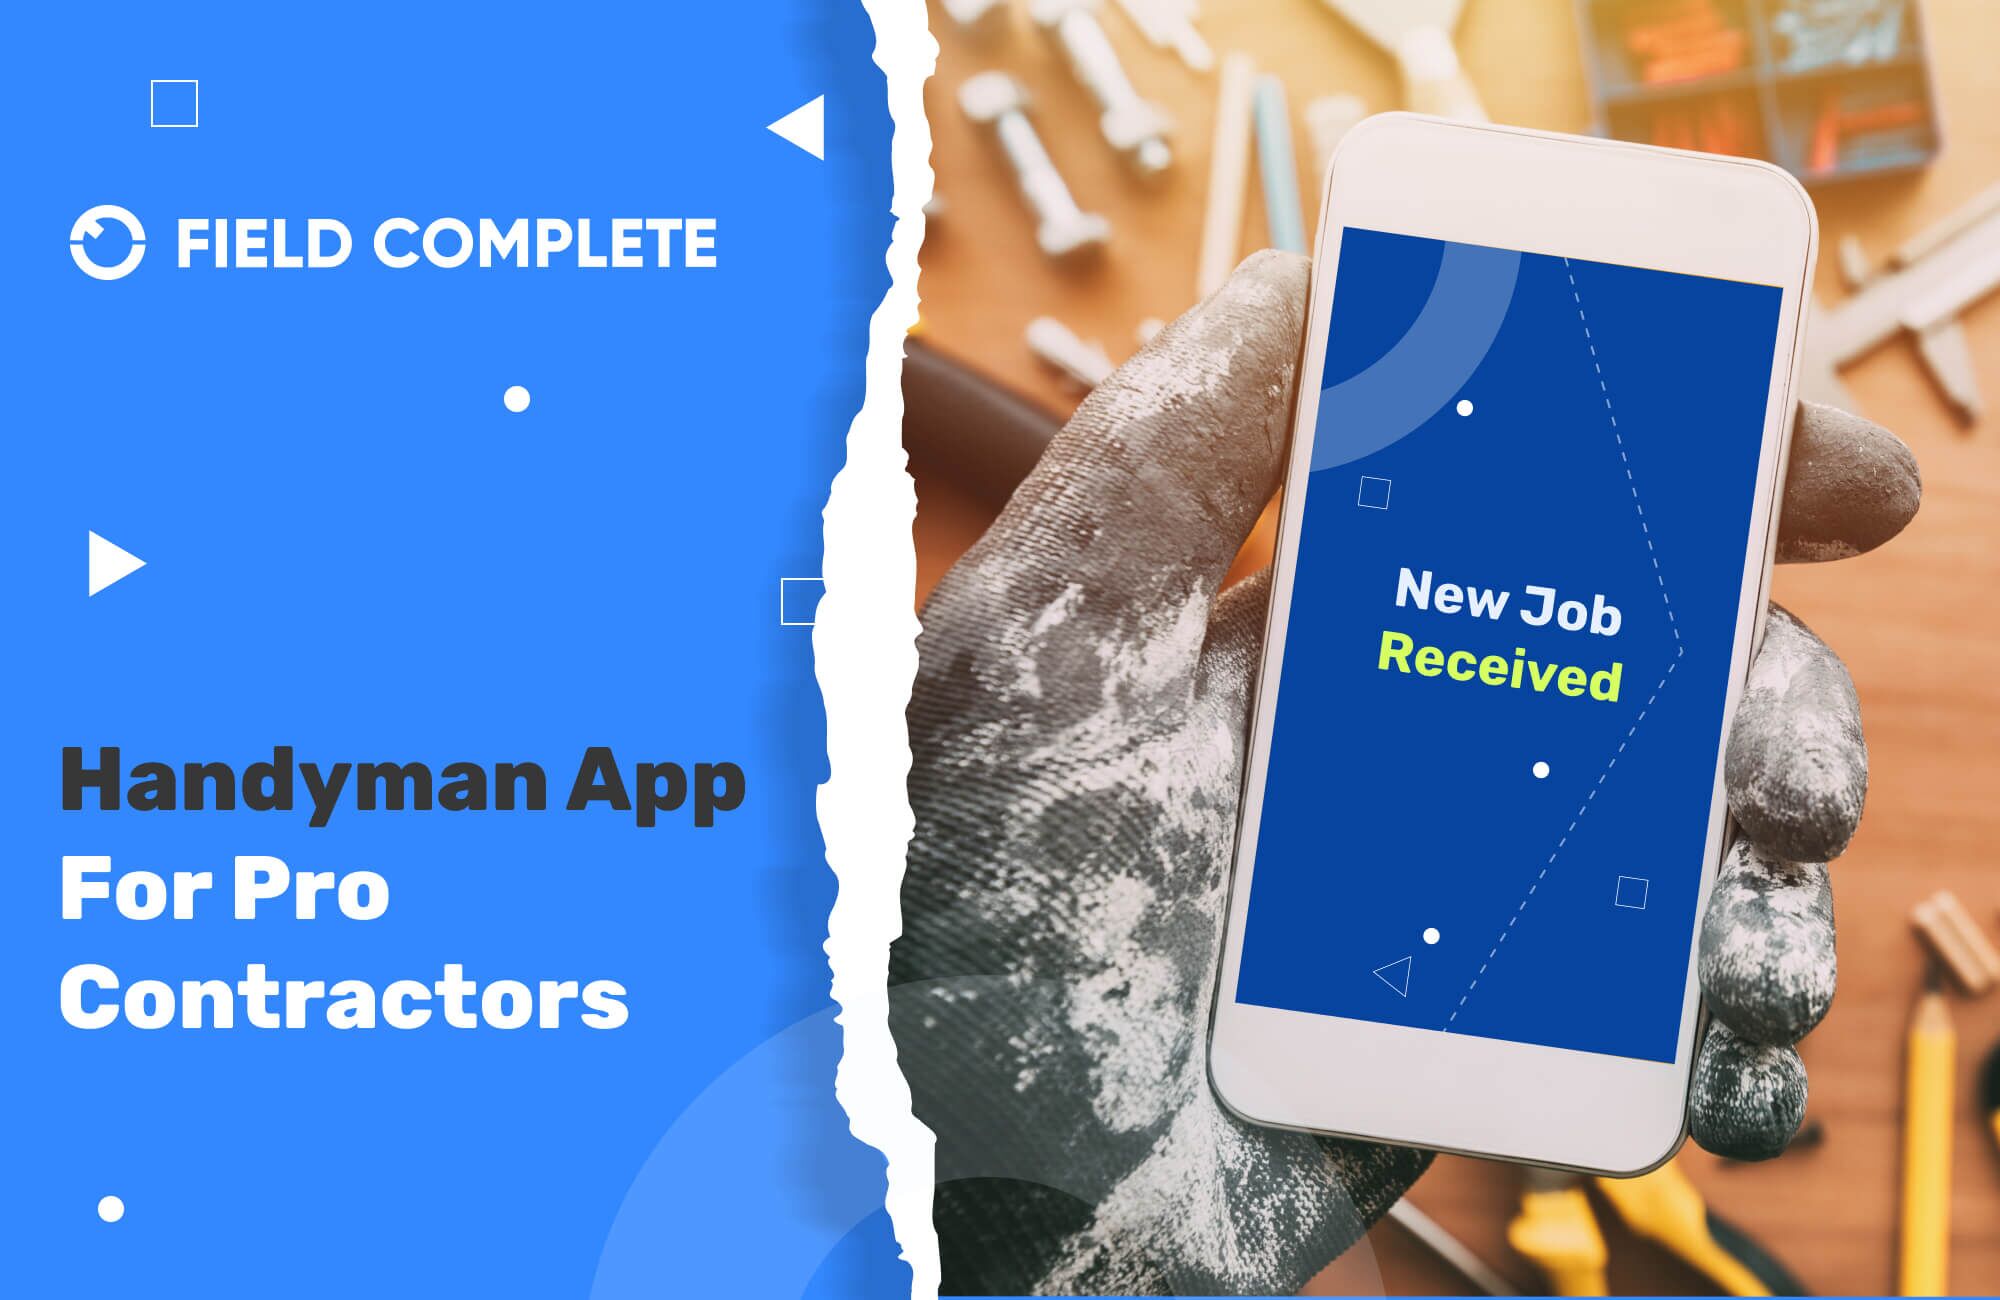 How to Become a Pro Contractor Using Best Handyman App